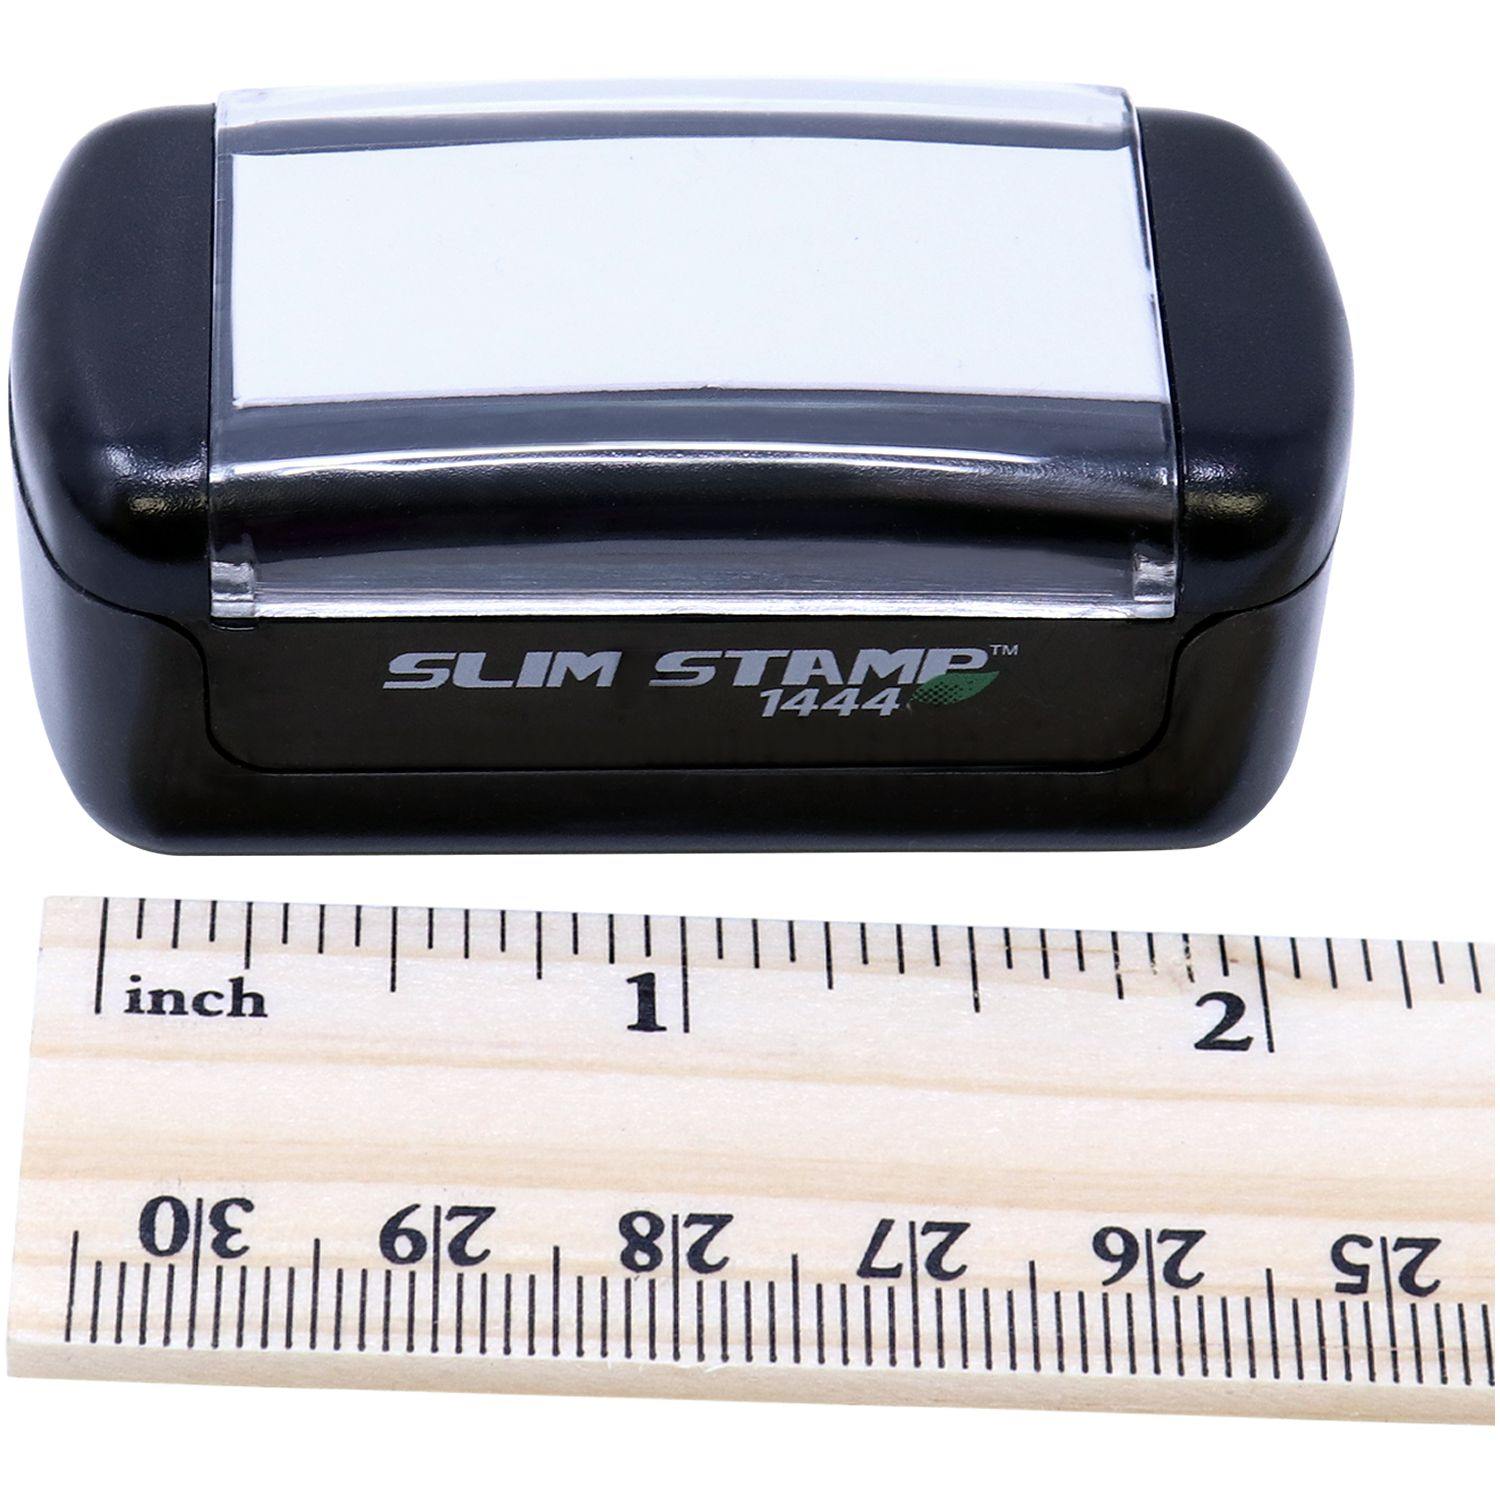 Measurement Slim Pre-Inked Non-Smoker Stamp with Ruler